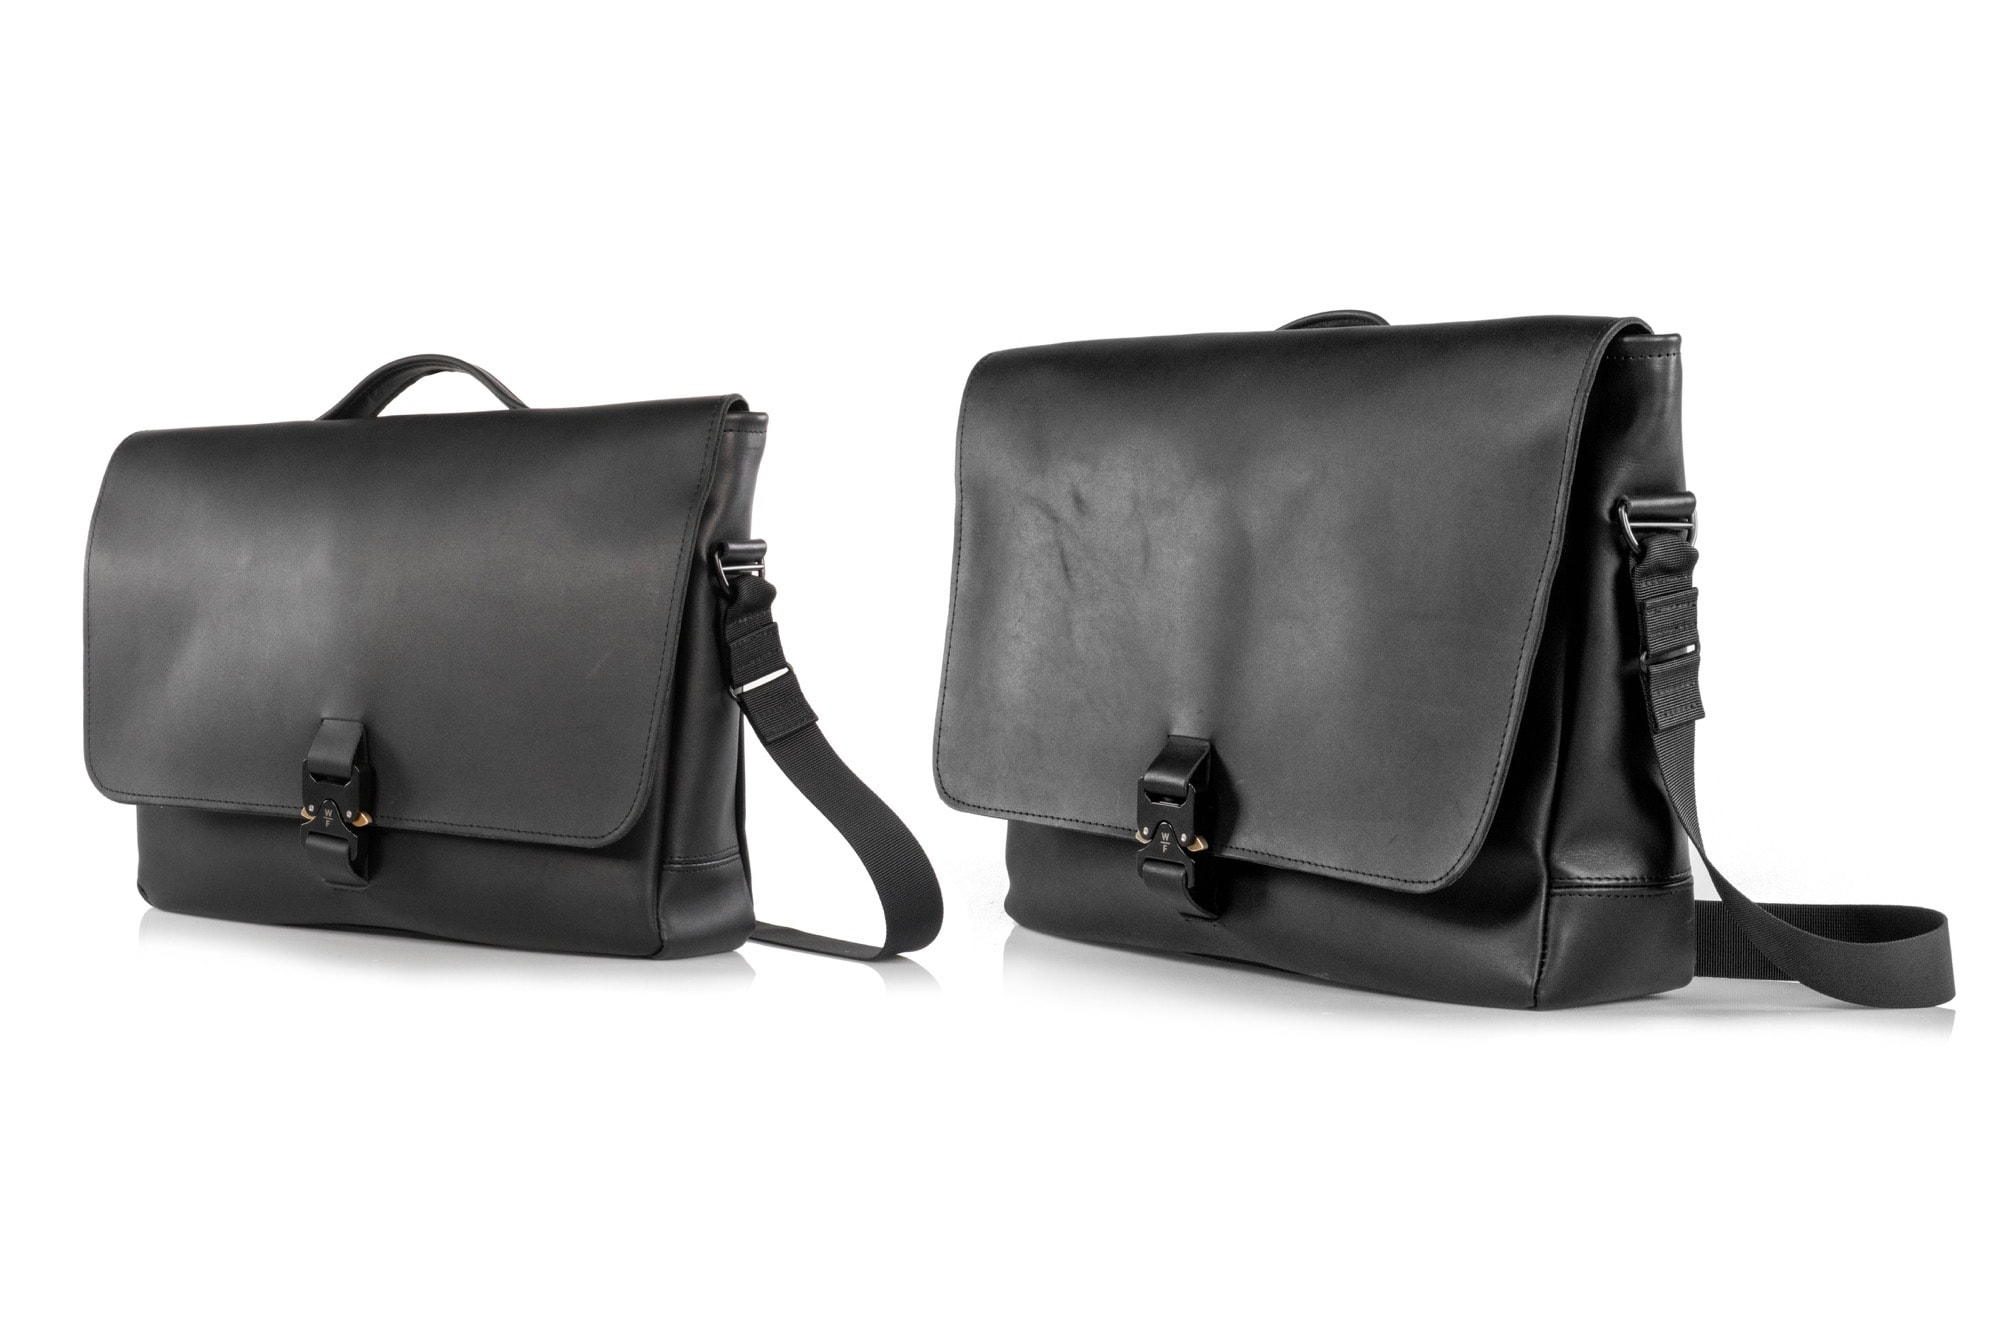 WaterField Designs Executive Leather Messenger comes in two sizes.